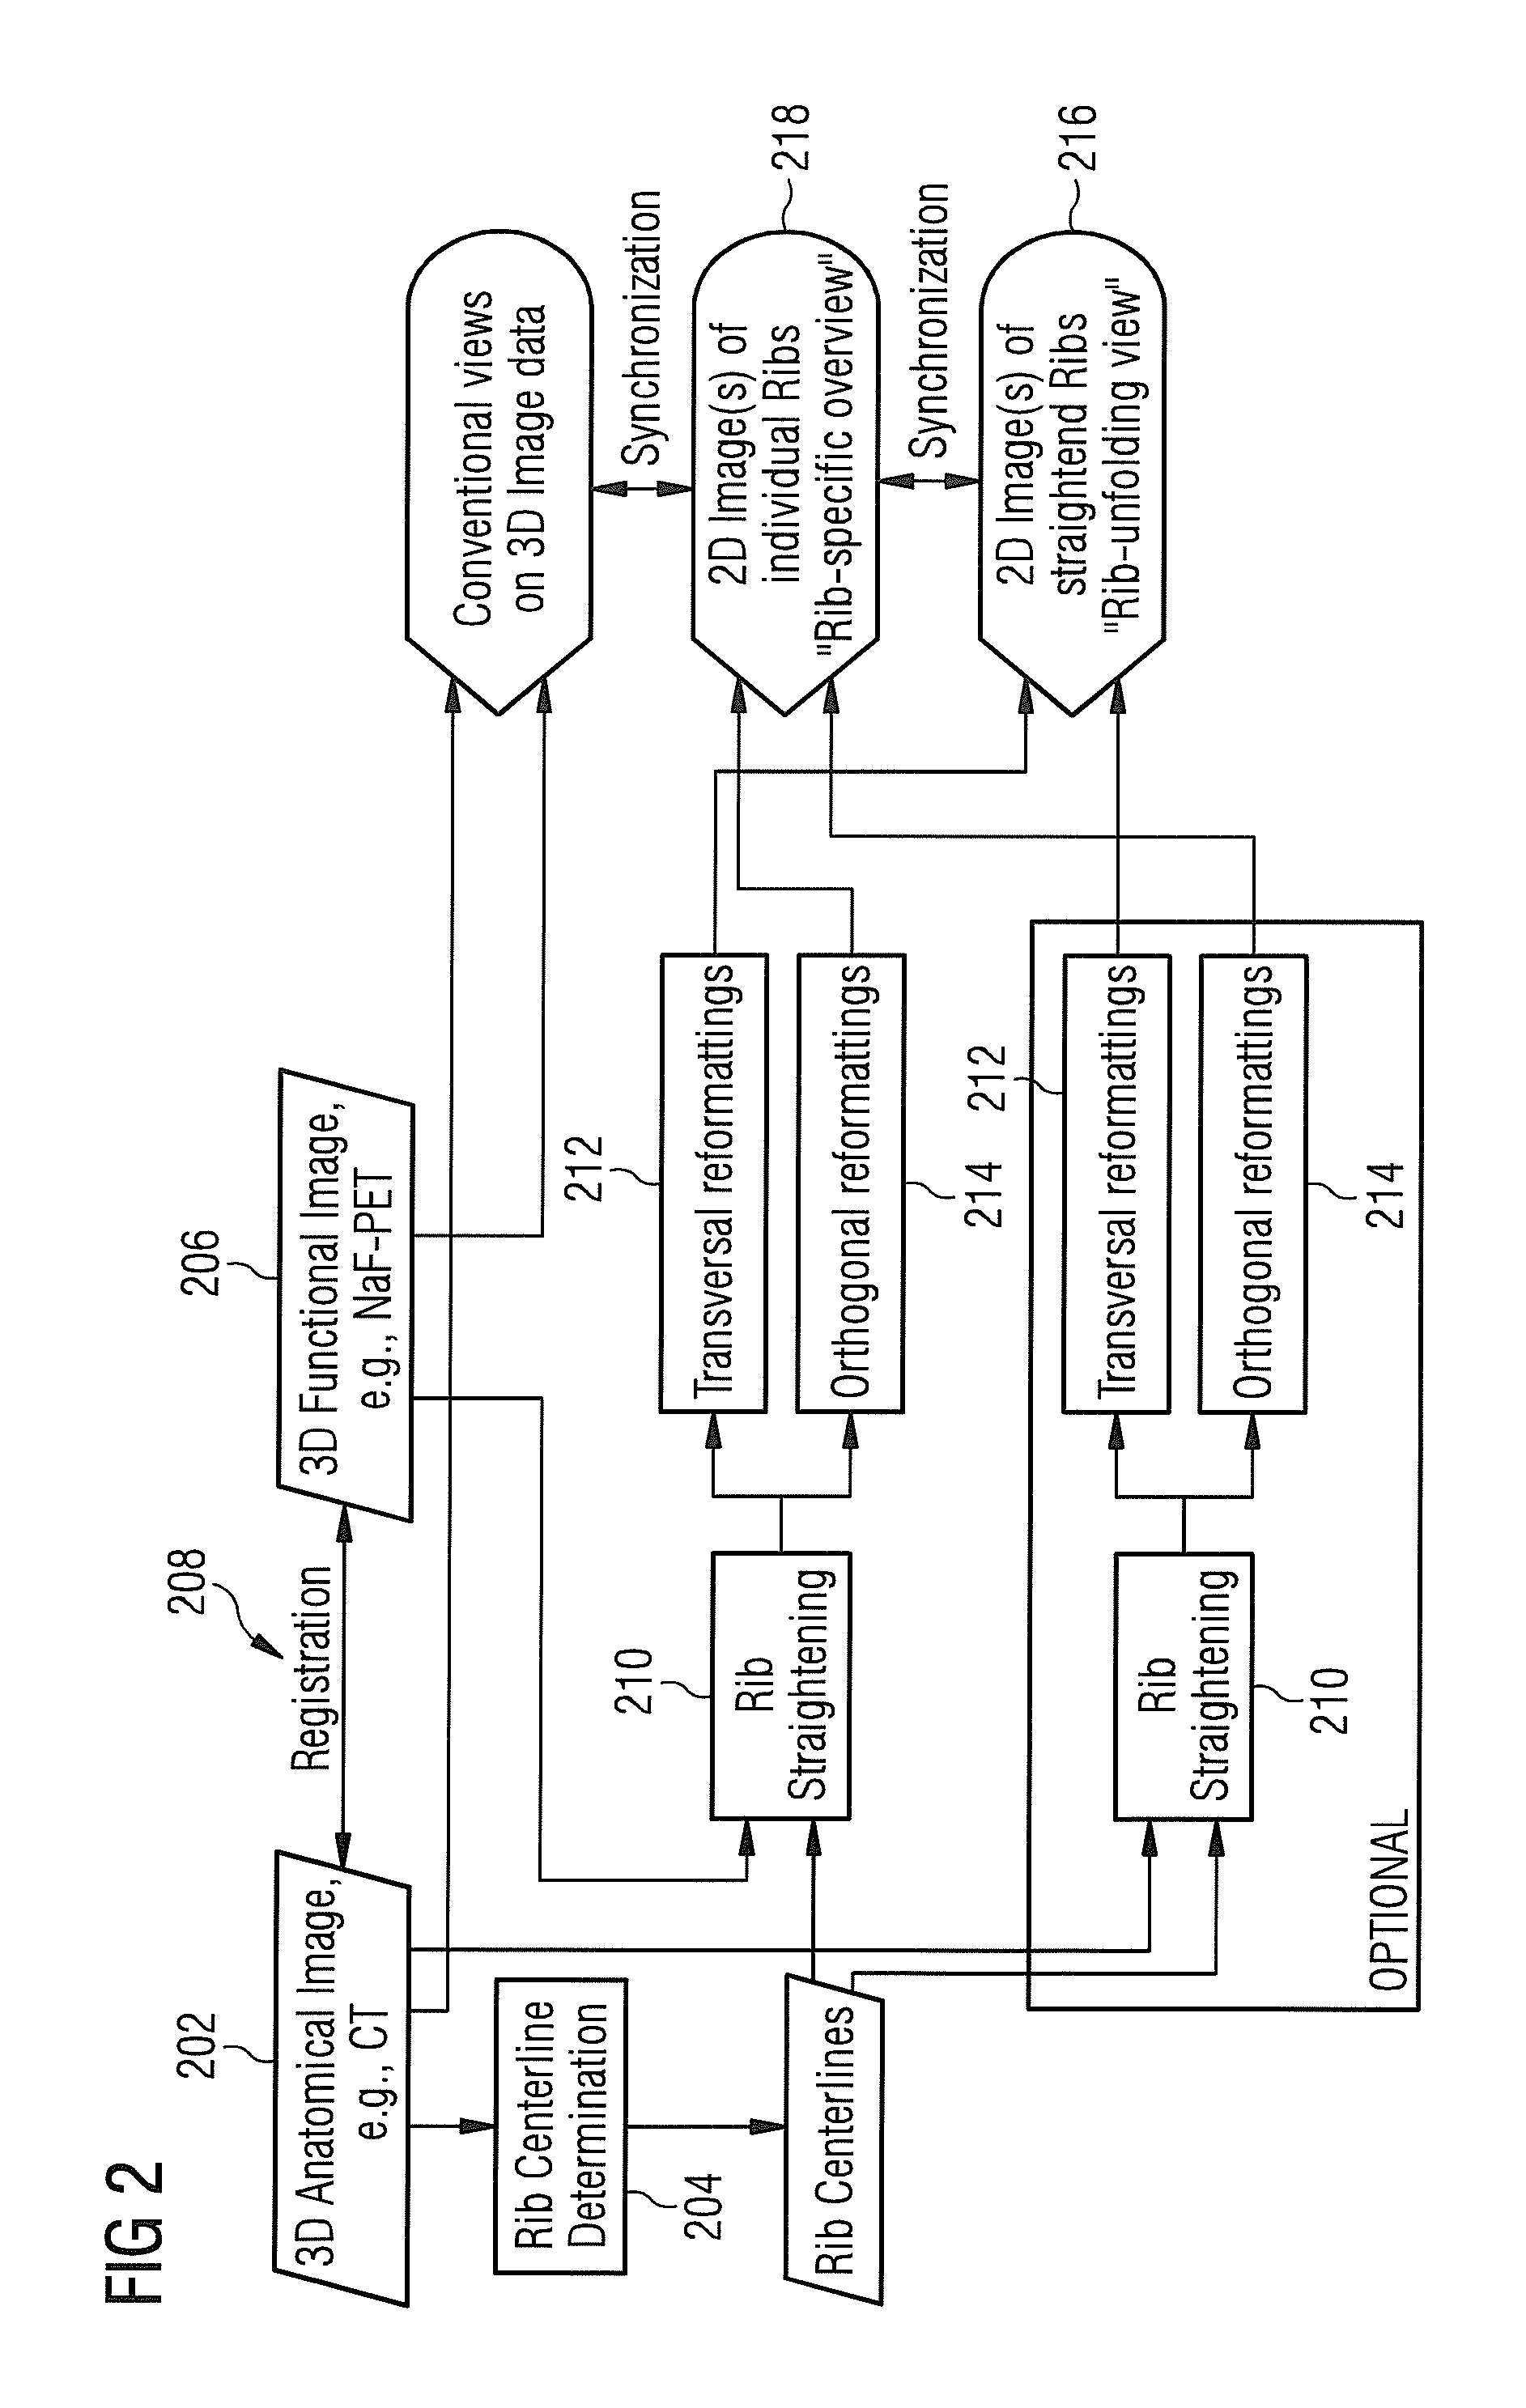 Method and apparatus for generating an enhanced image from medical imaging data